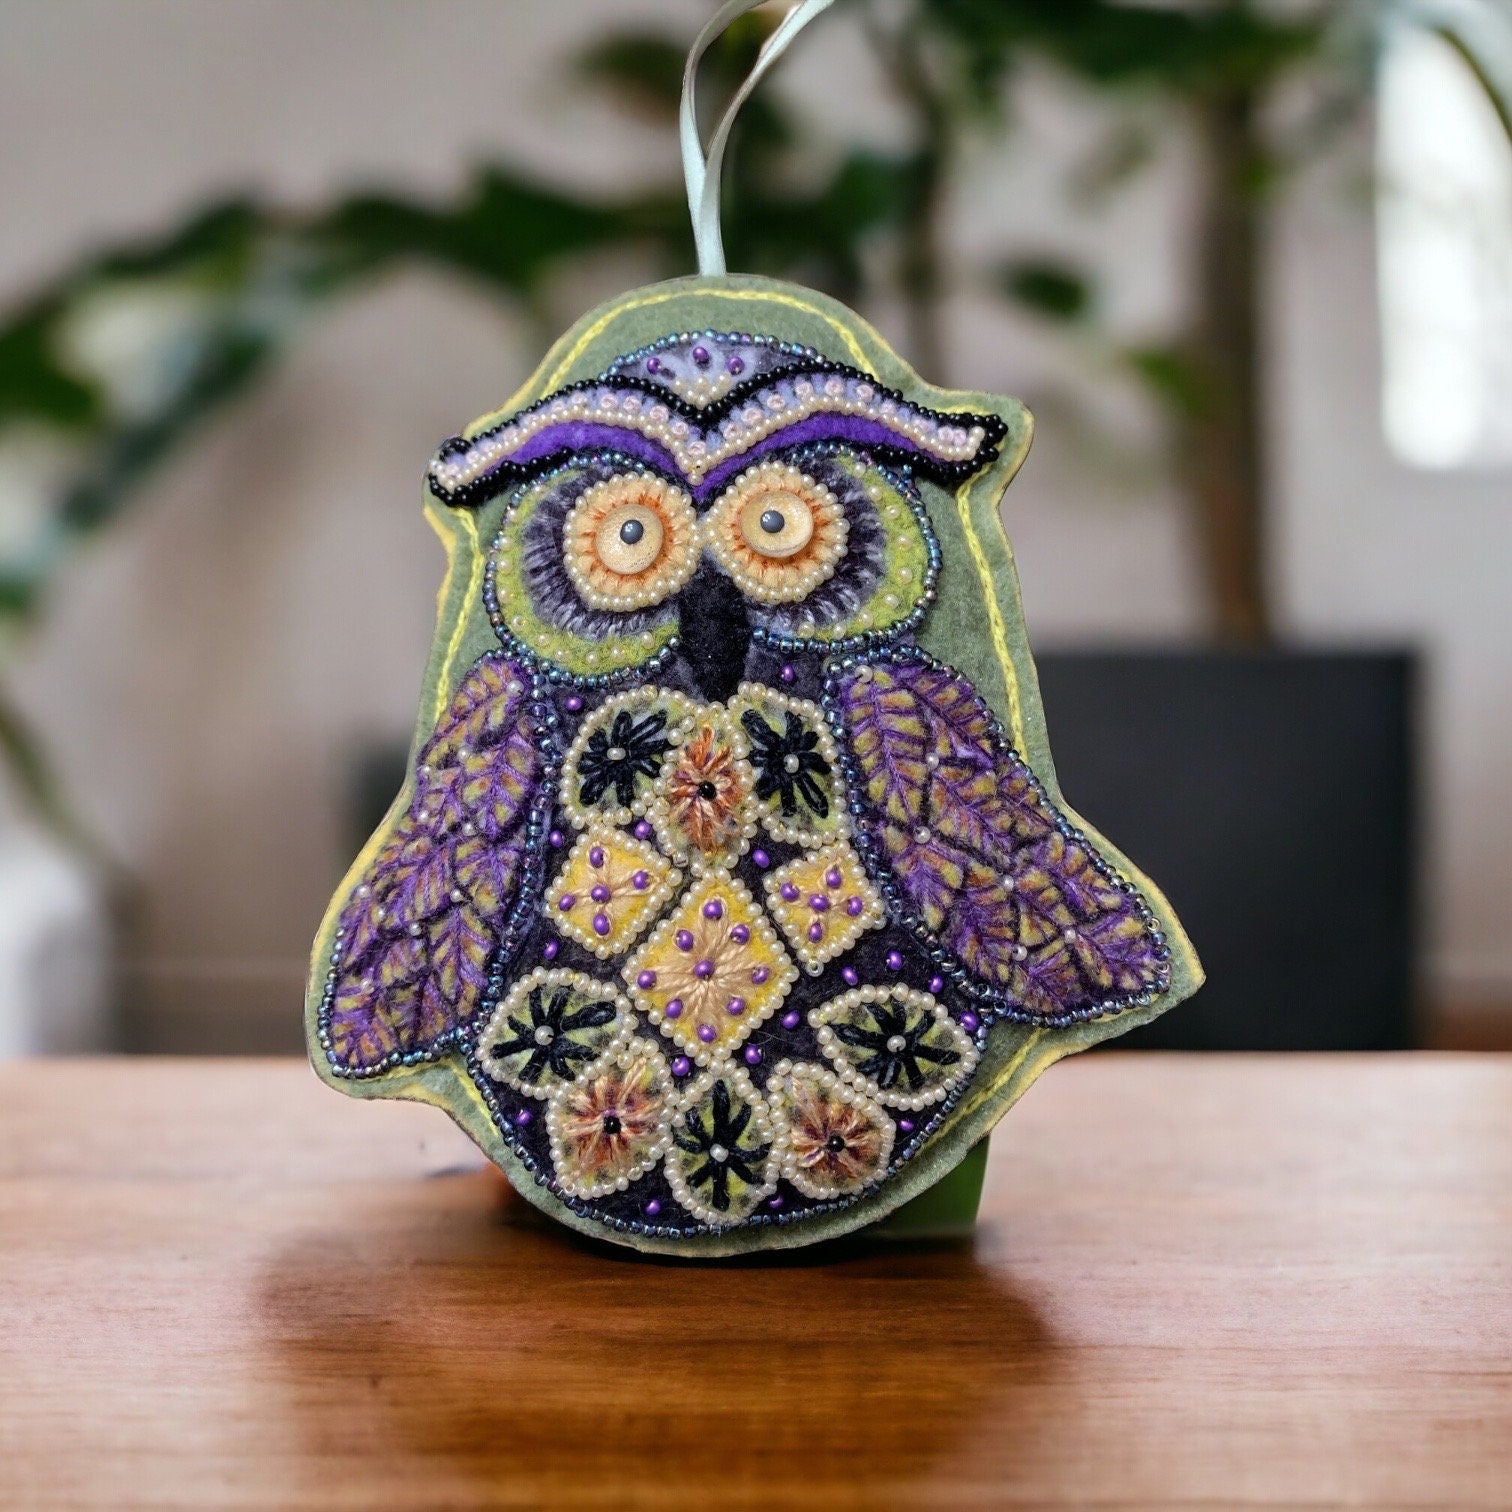 Scented Owl Sachet with Bead Embroidery on Felt-One Of A Kind Owl Ornament